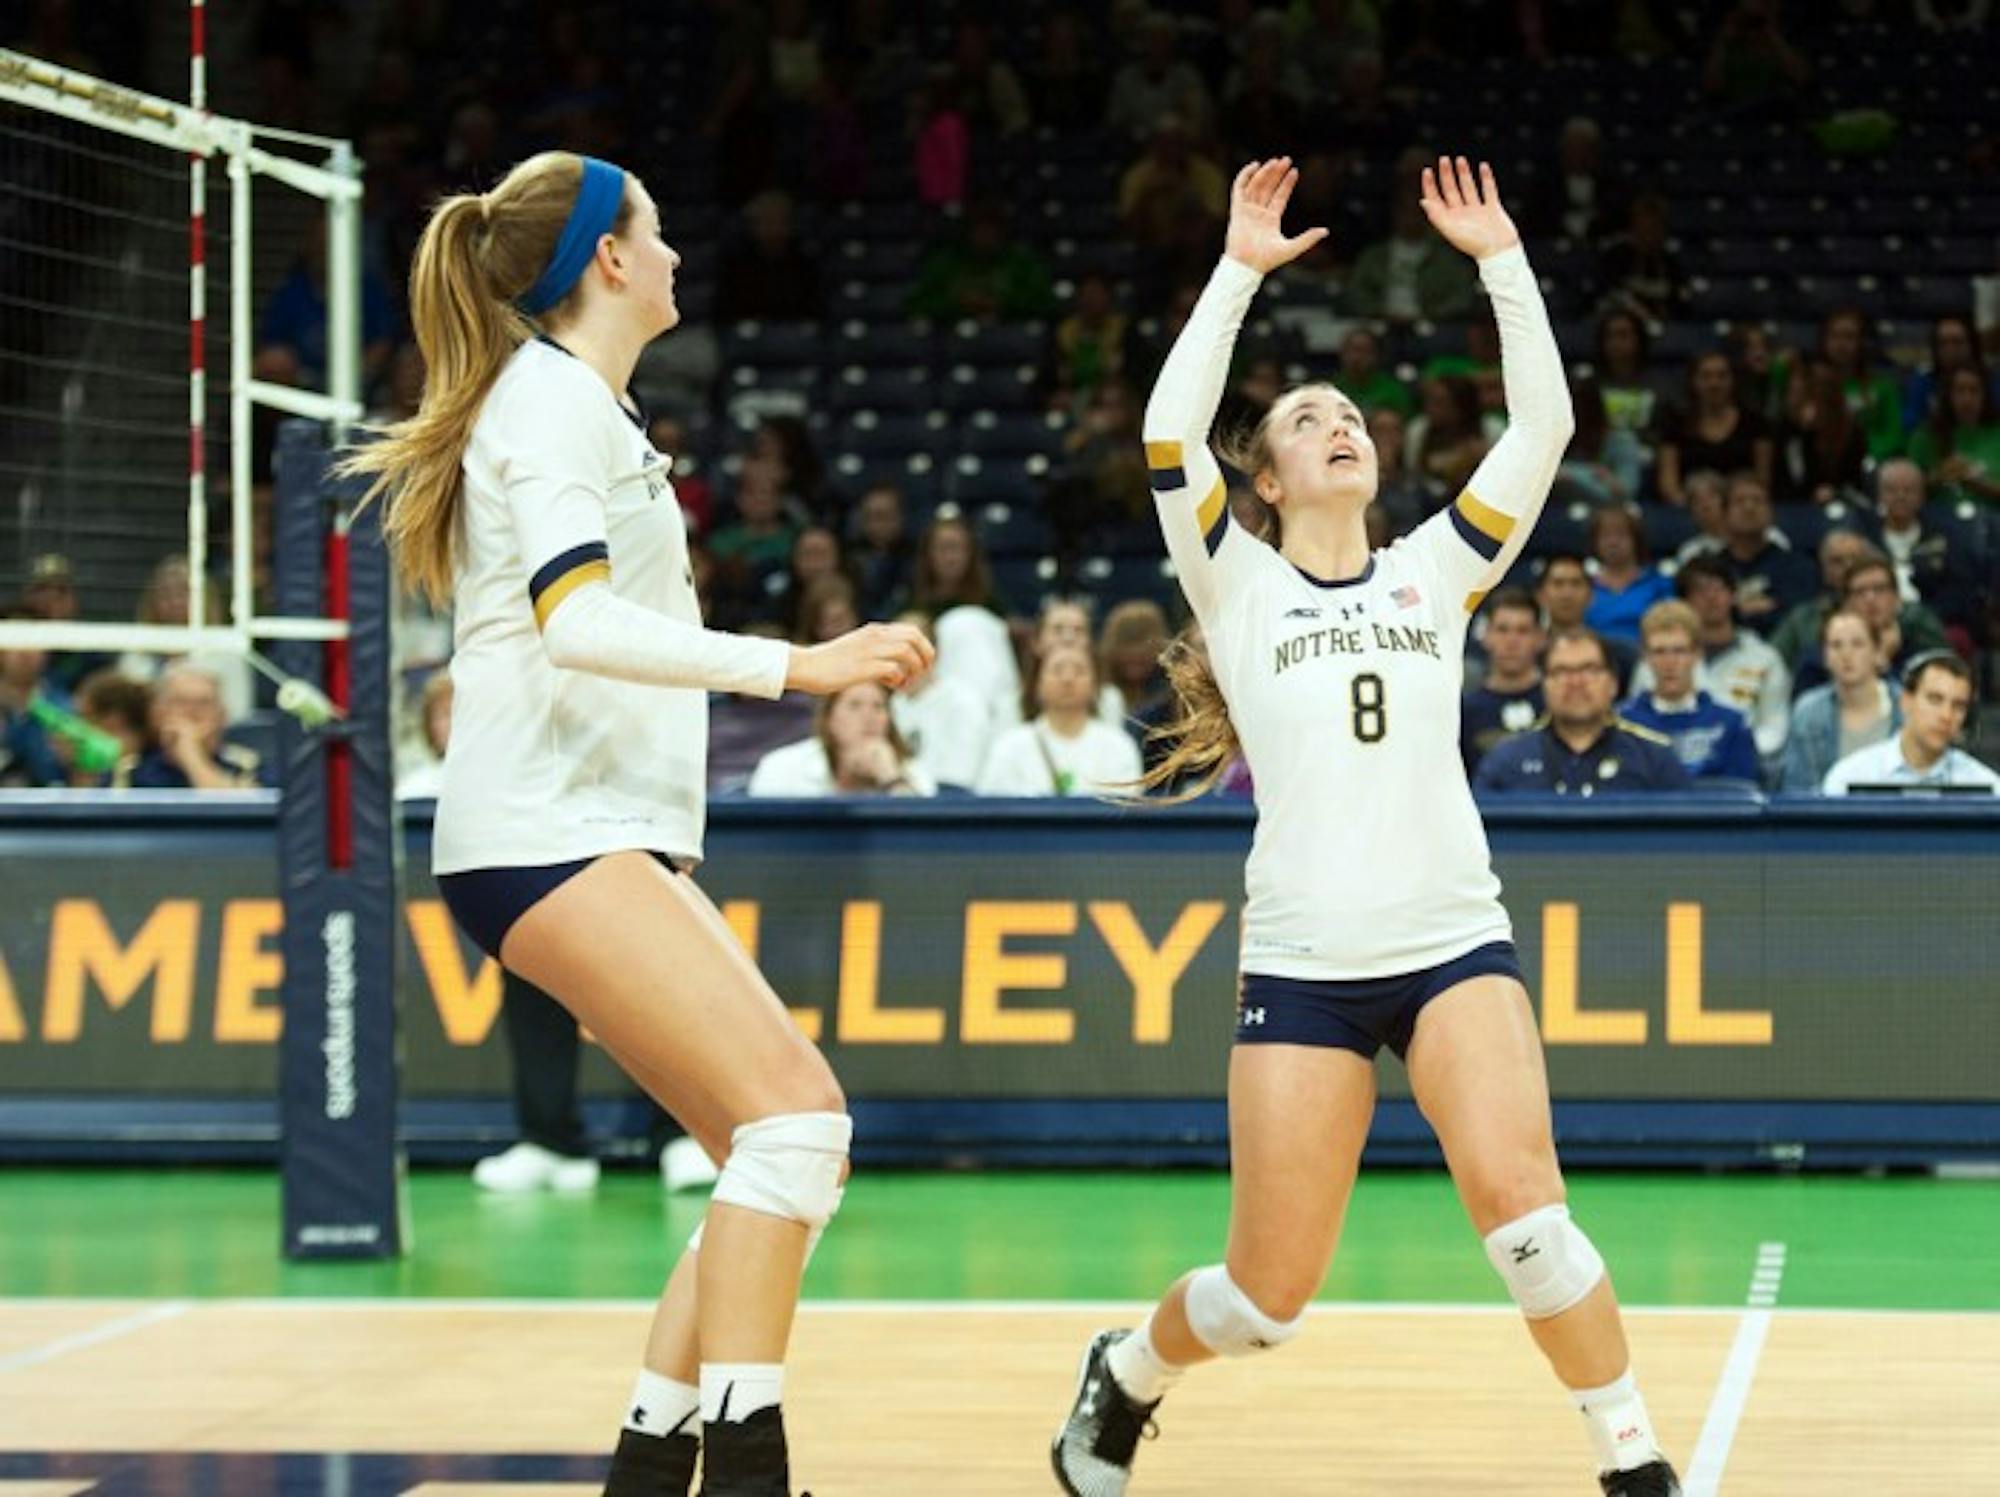 Irish junior setter Caroline Holt prepares to set the ball during Notre Dame’s 3-1 win over Duke on Sept. 30 at Purcell Pavilion. Holt was the ACC leader in assists when she broke her leg in the middle of the season.